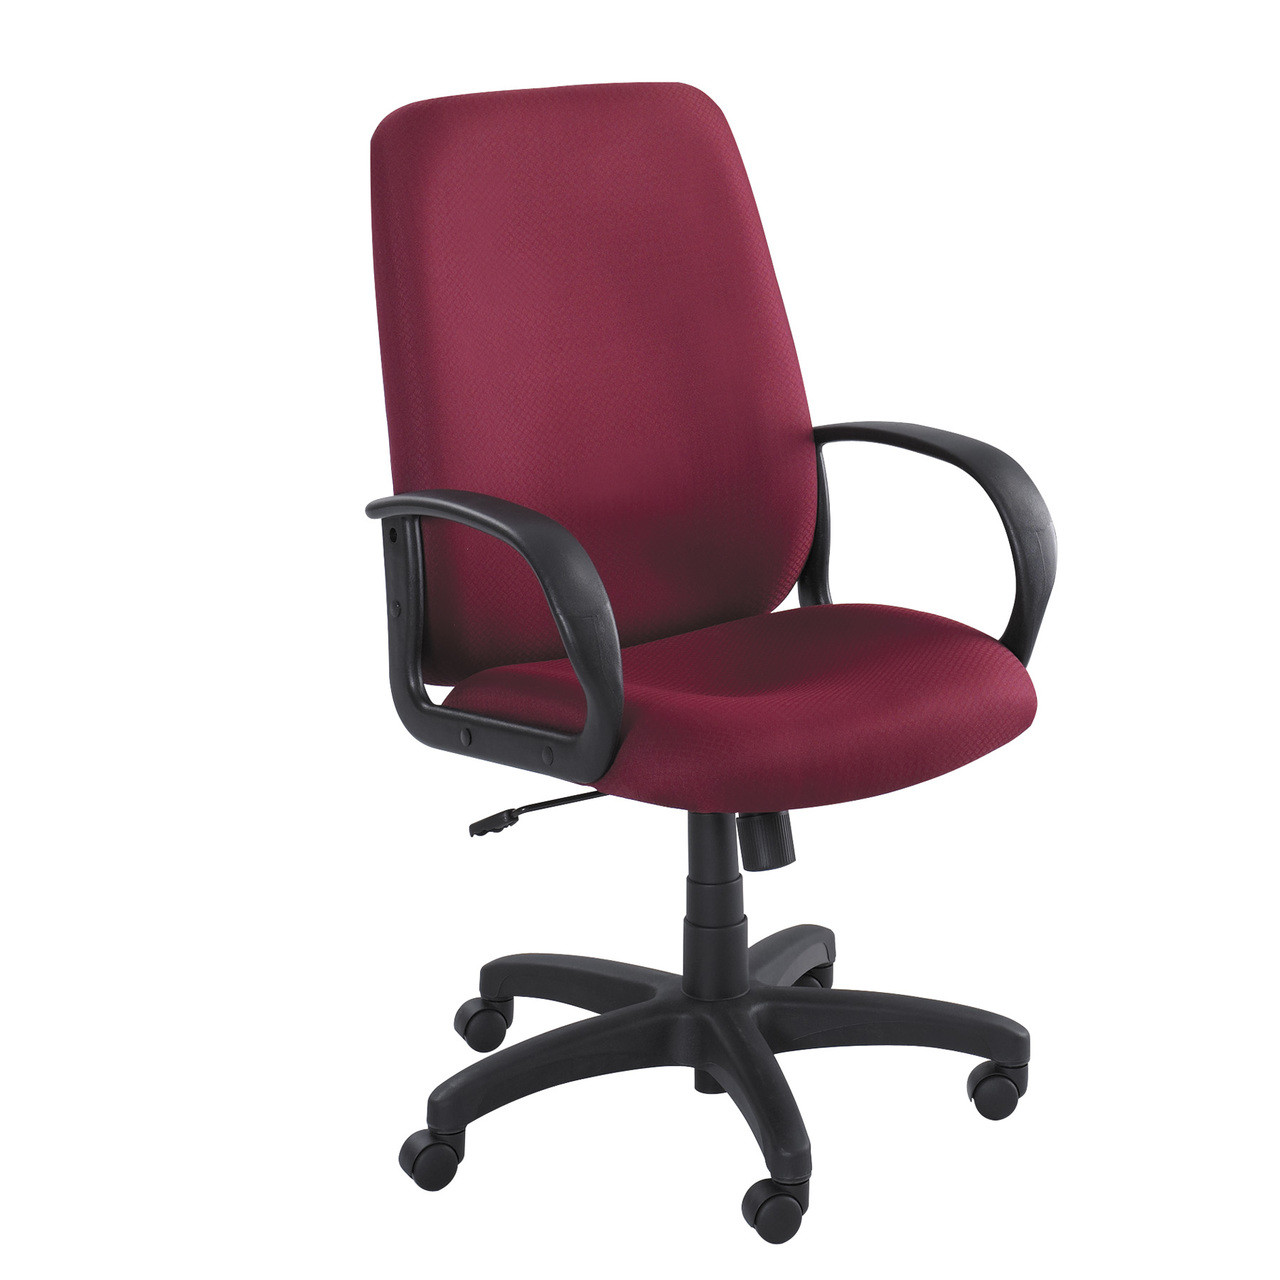 Poise Executive High Back Seating